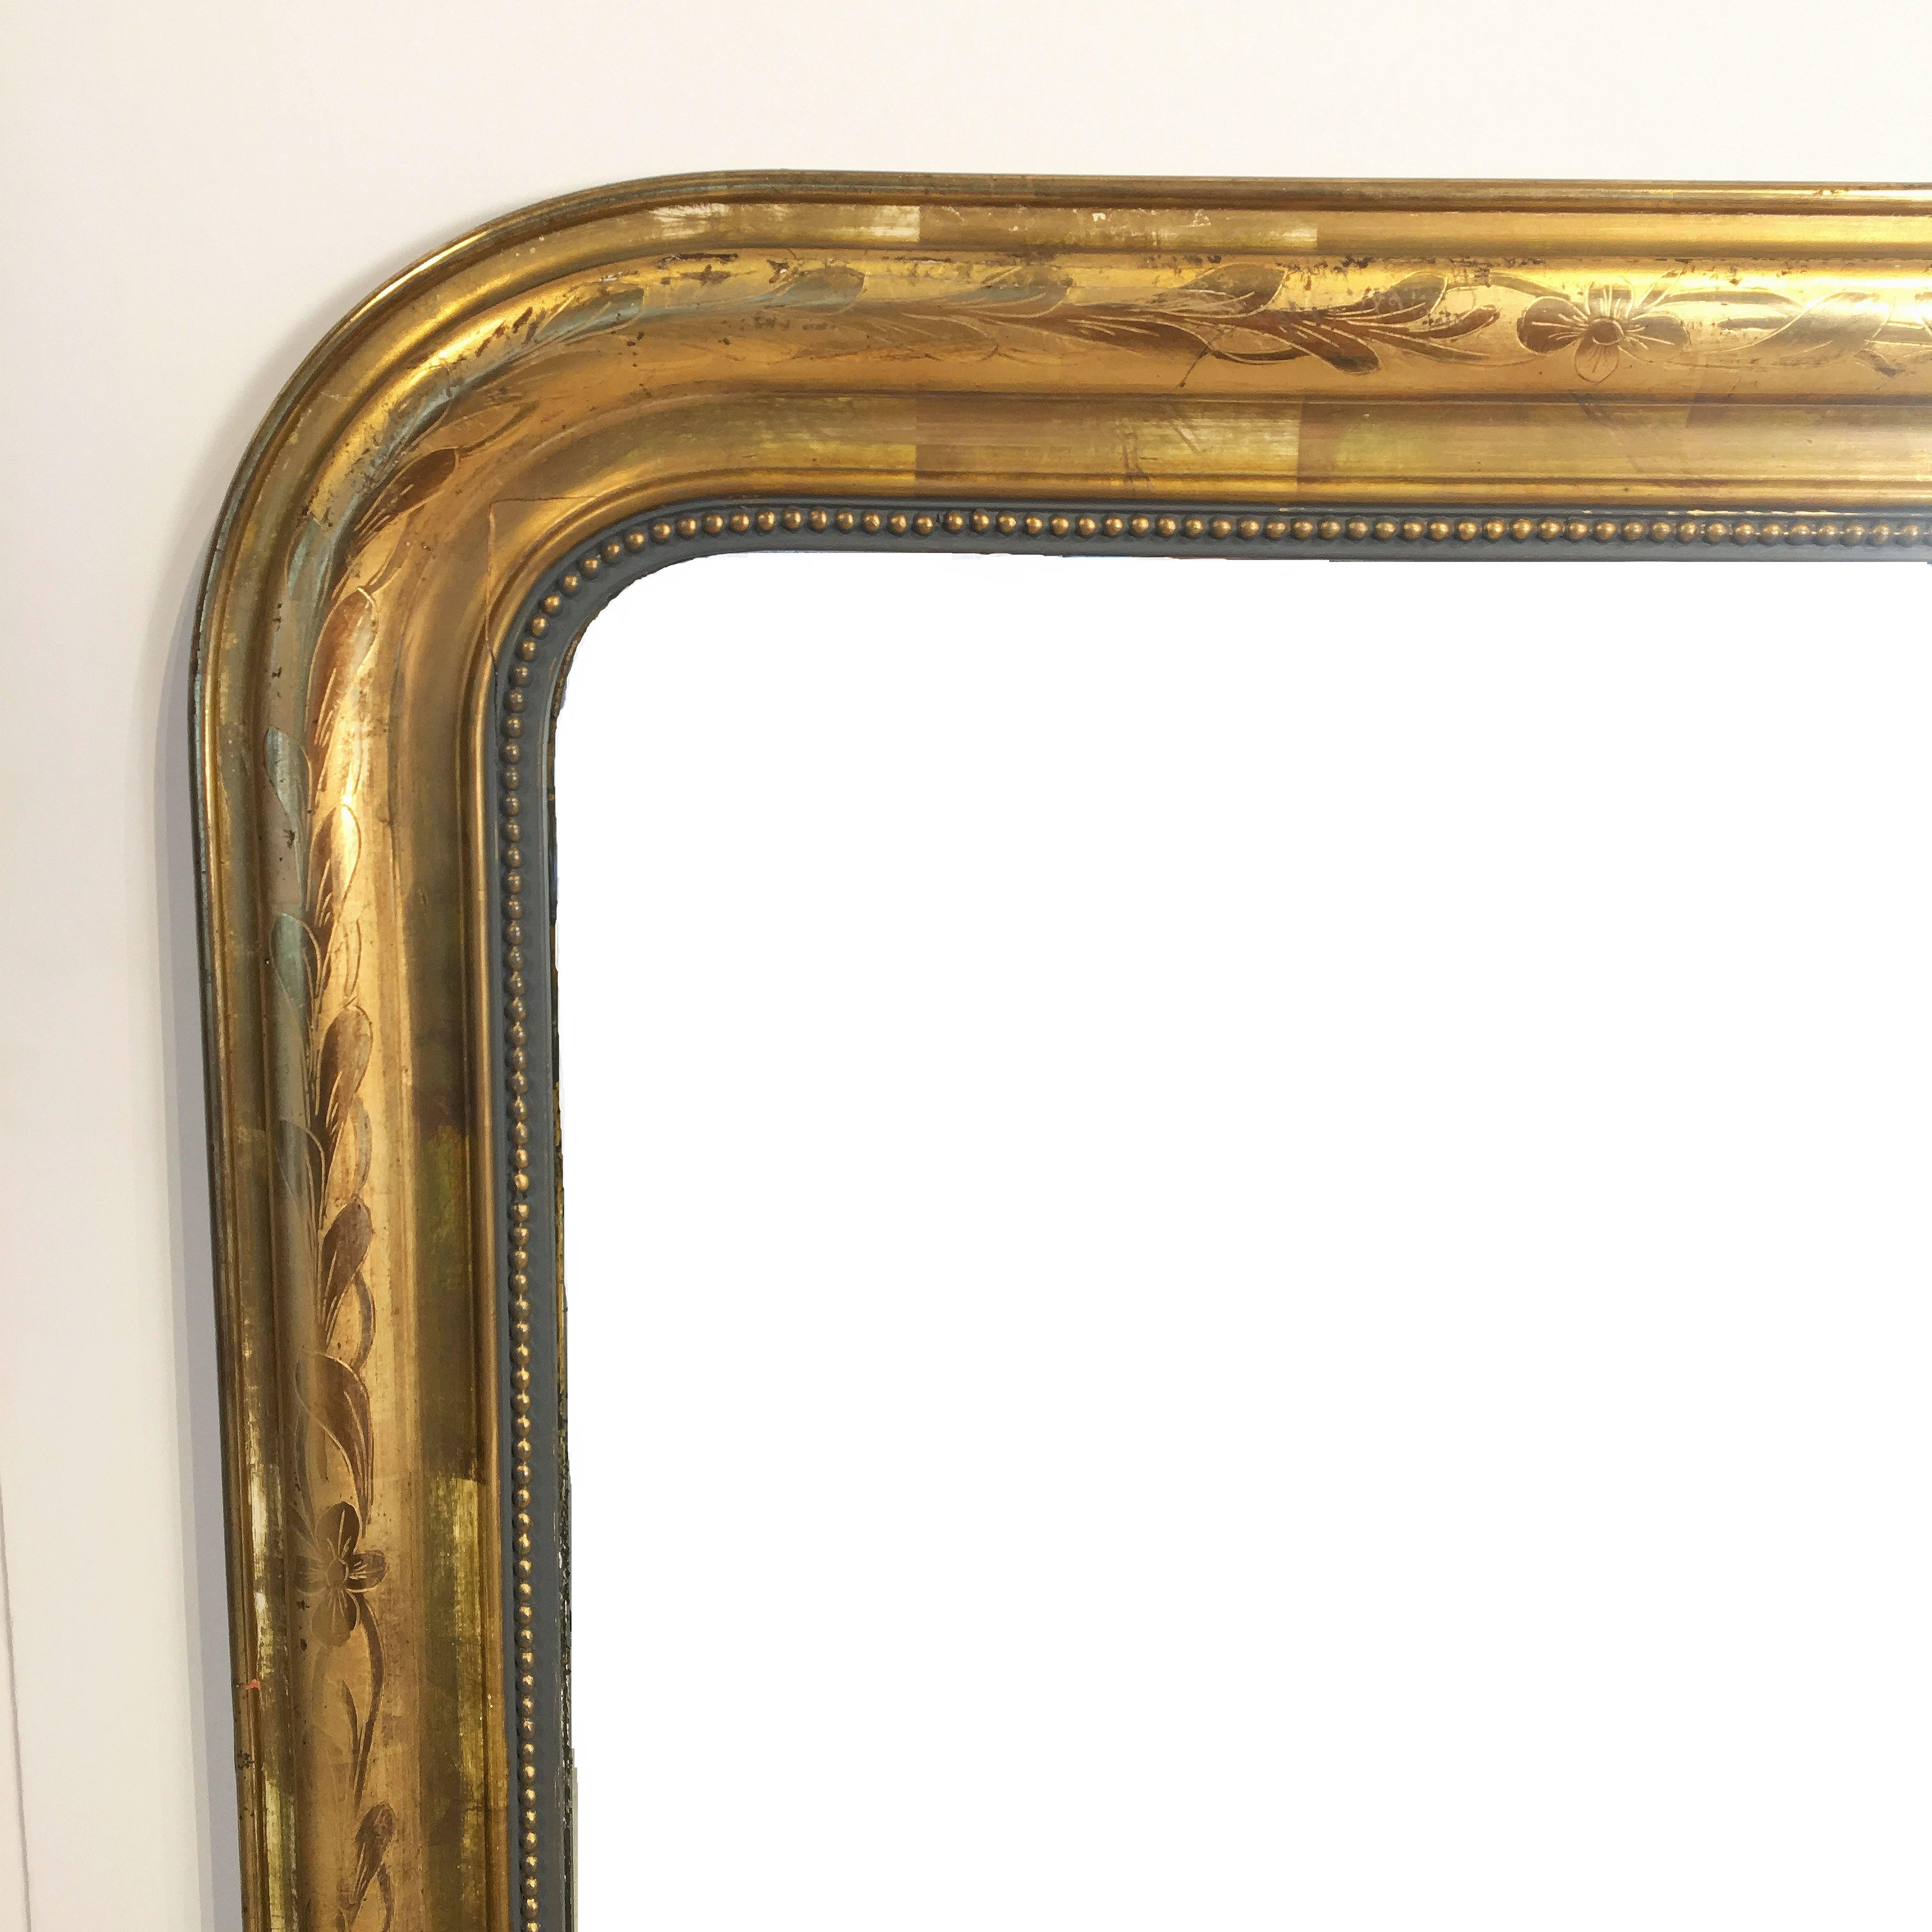 A handsome large Louis Philippe gilt wall mirror from France, featuring a lovely moulded surround and an etched foliate design showing through gold-leaf.

Dimensions: H 55 1/4 inches x W 39 3/4 inches

Other sizes available in this style.